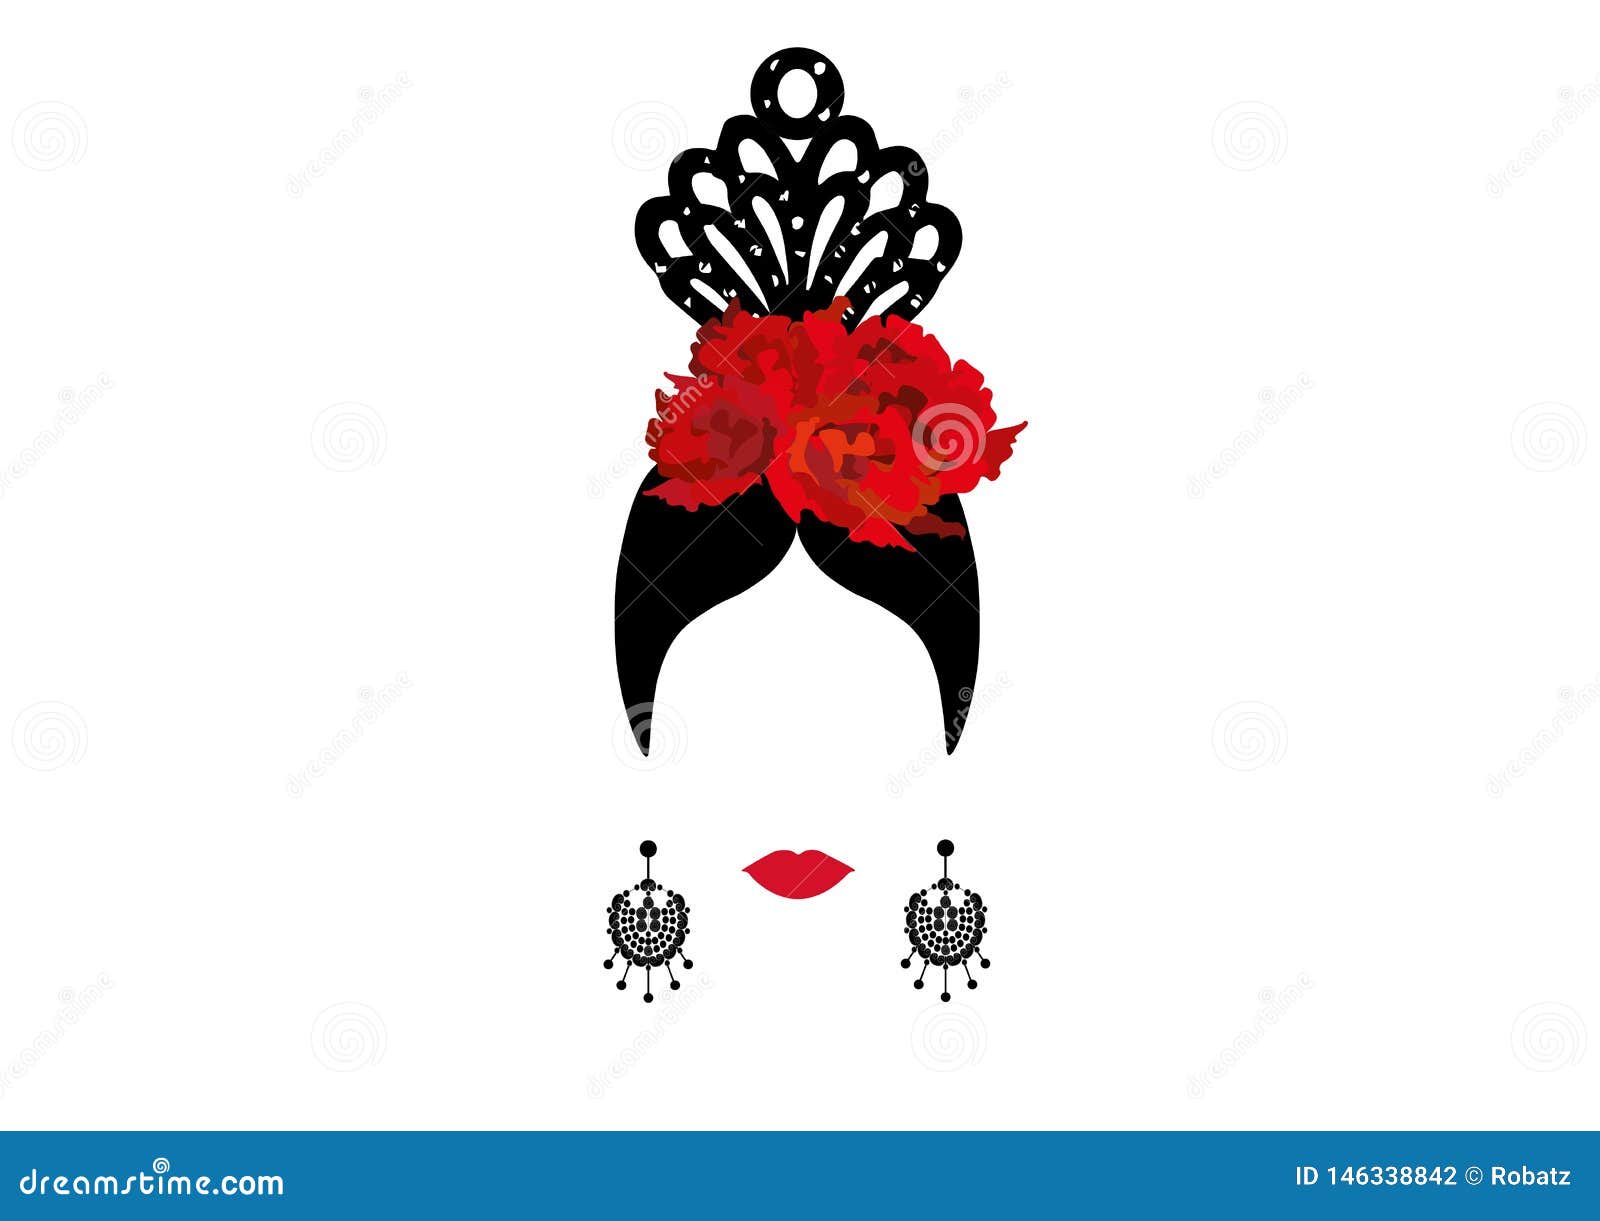 Vector Portrait Traditional Latin or Spanish Woman Dancer , Lady with Accessories Peineta, Earrings and Flower Stock Vector - Illustration of cartoon, entertainment: 146338842